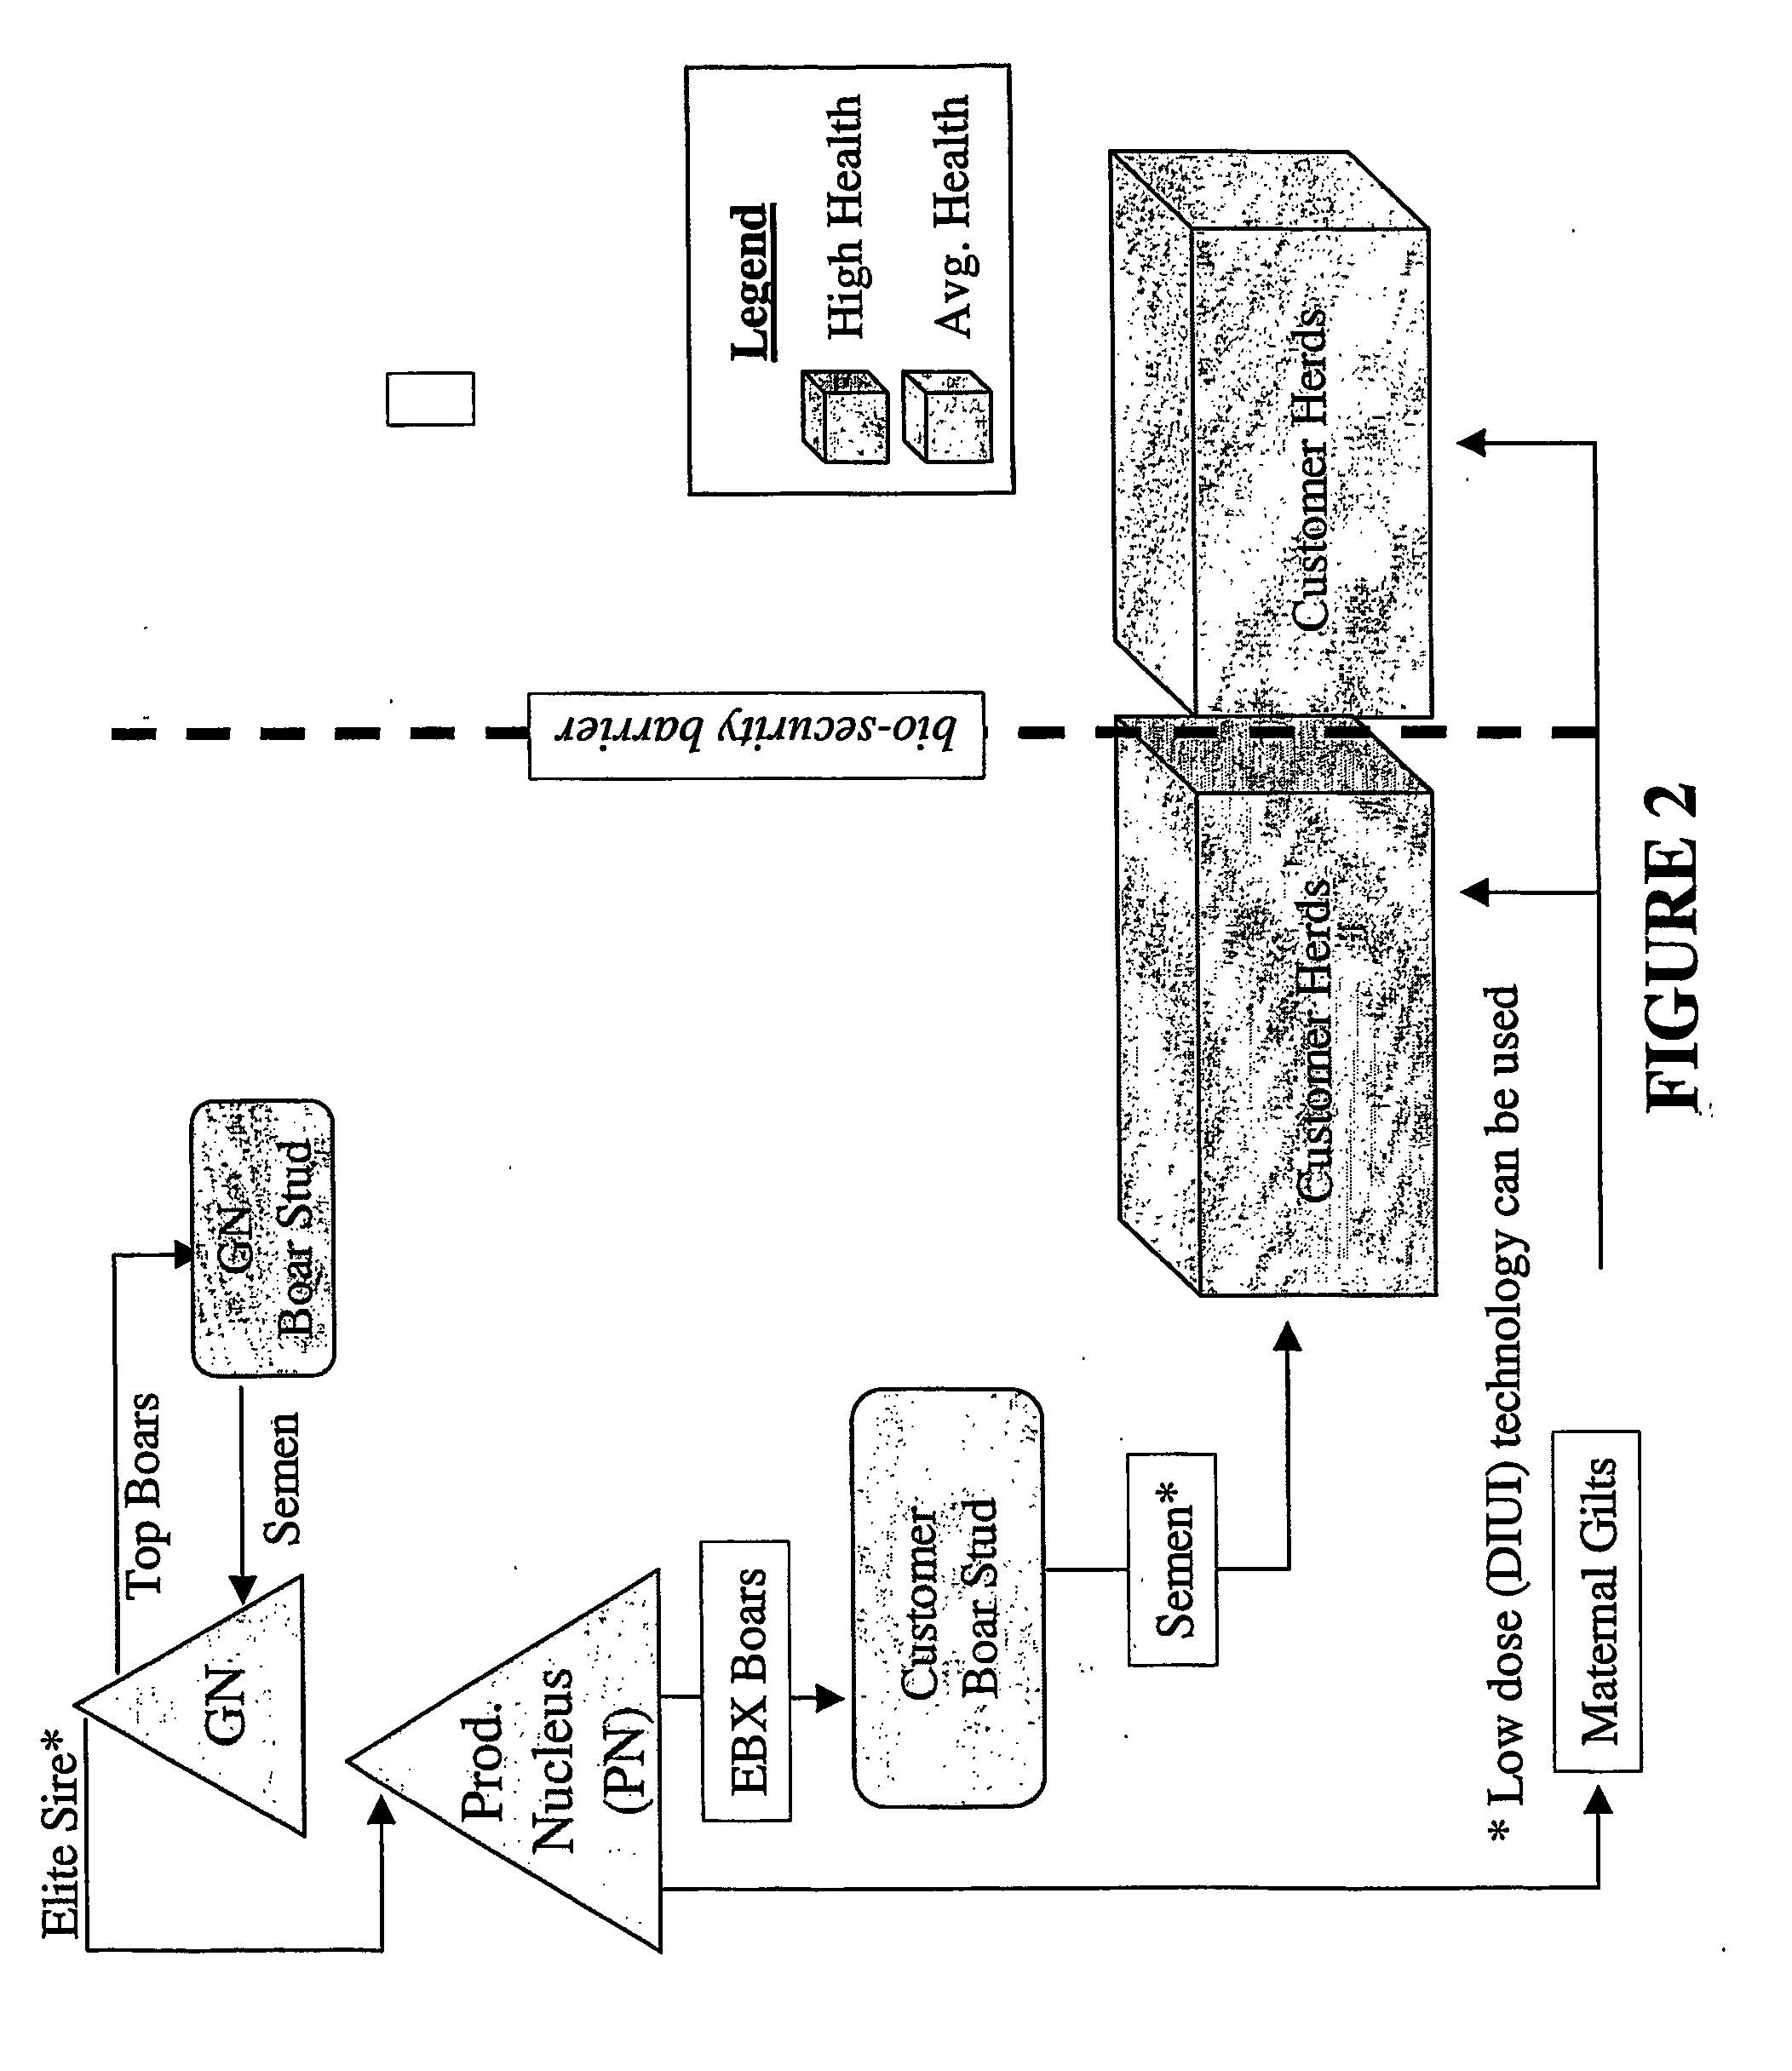 Method for Genetic Improvement of Terminal Boars